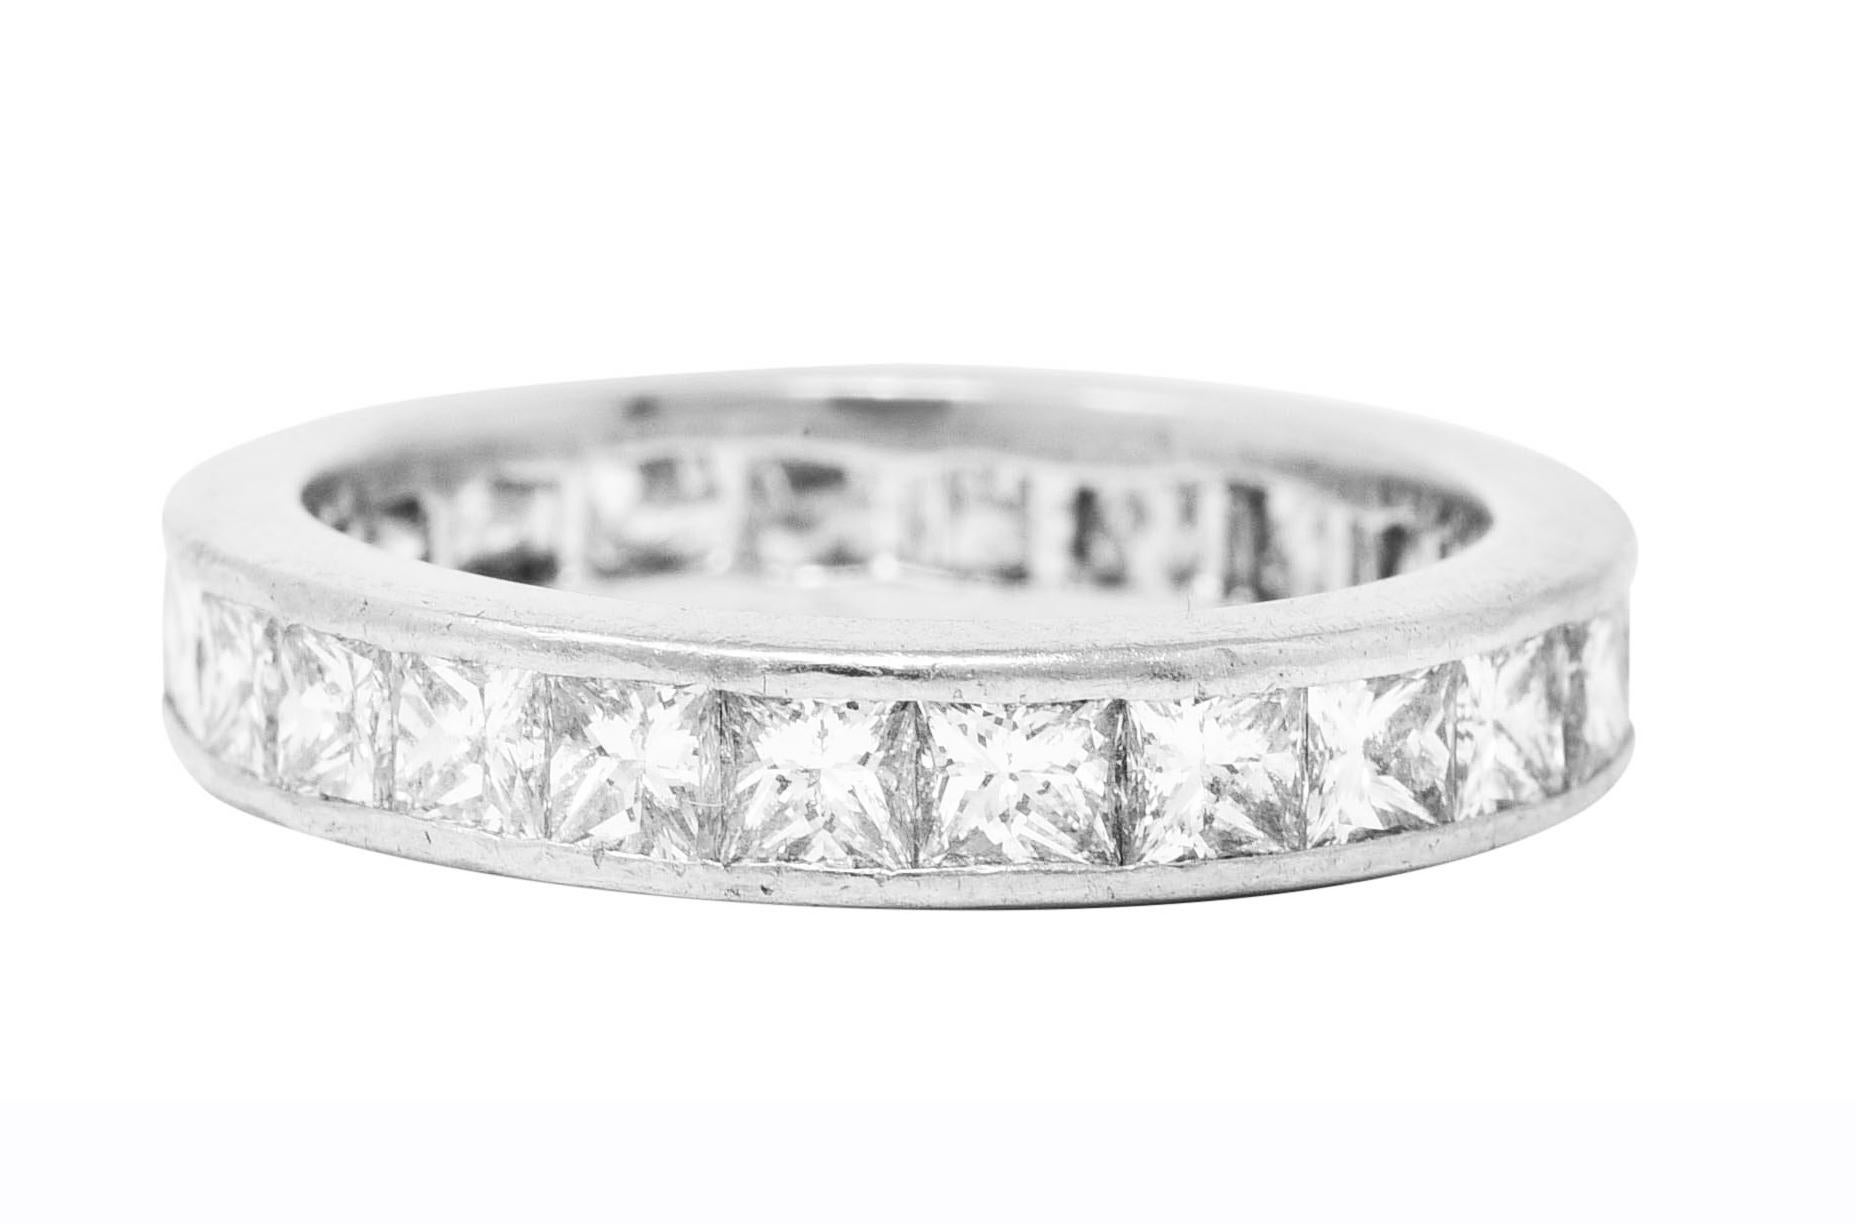 Band ring features princess cut diamonds channel set fully around

Weighing approximately 2.30 carat total - G/H in color with VS clarity

With high polished finish

Tested as platinum

Circa: Early 21st century

Ring size: 6 1/4 and not